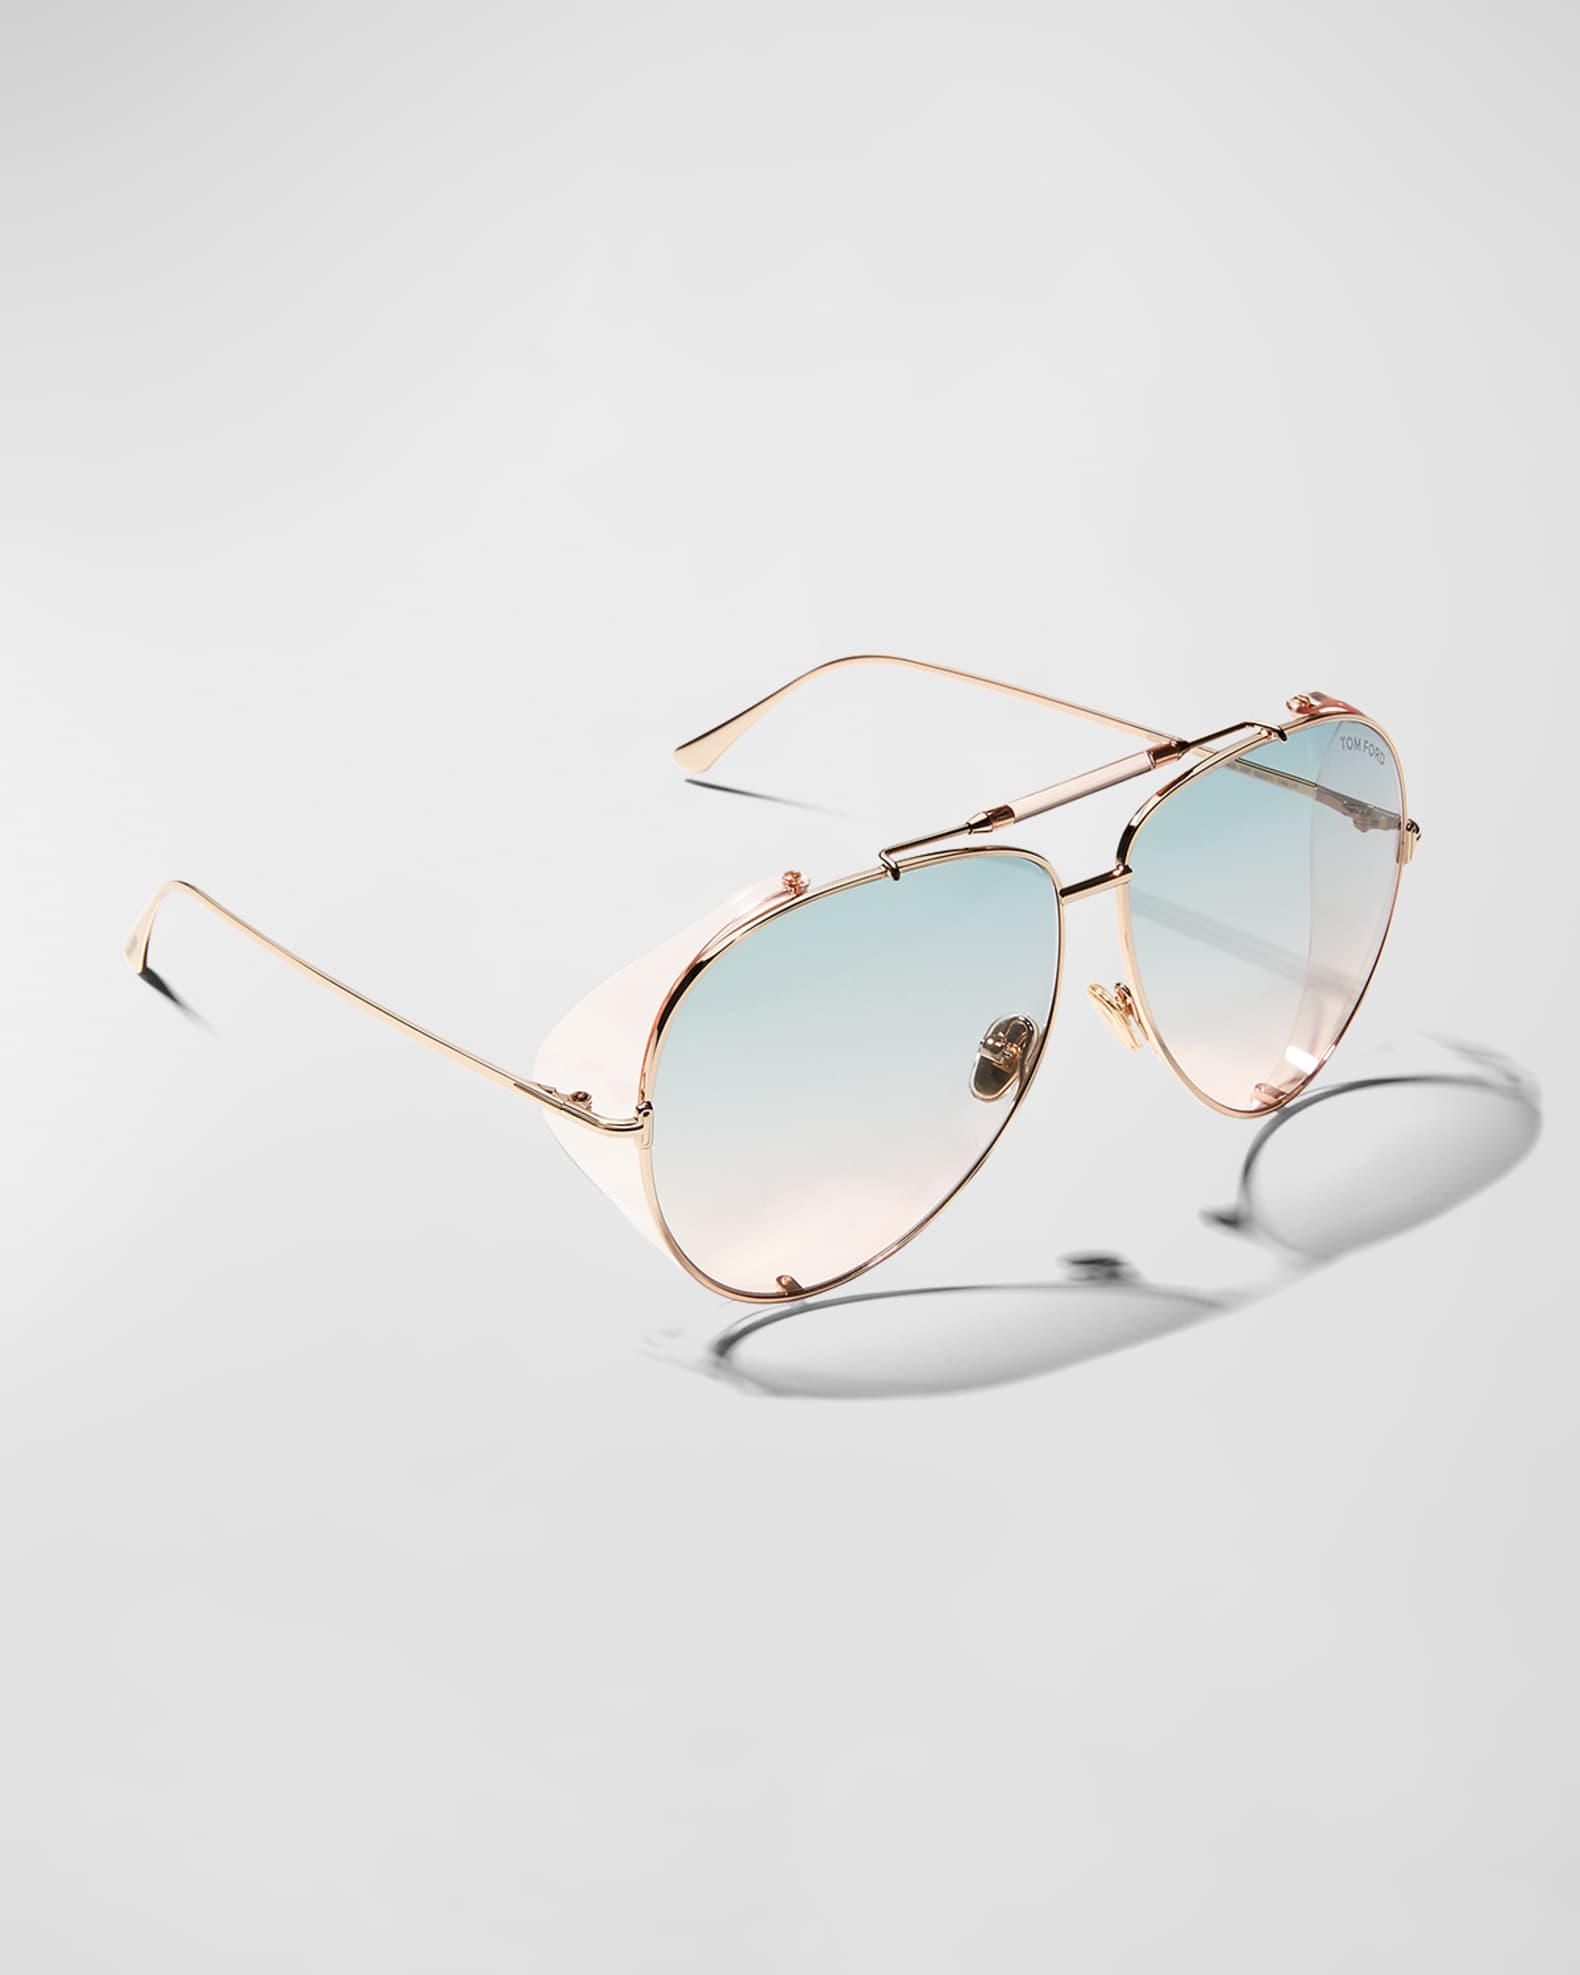 Arriba 30+ imagen tom ford sunglasses with side shields